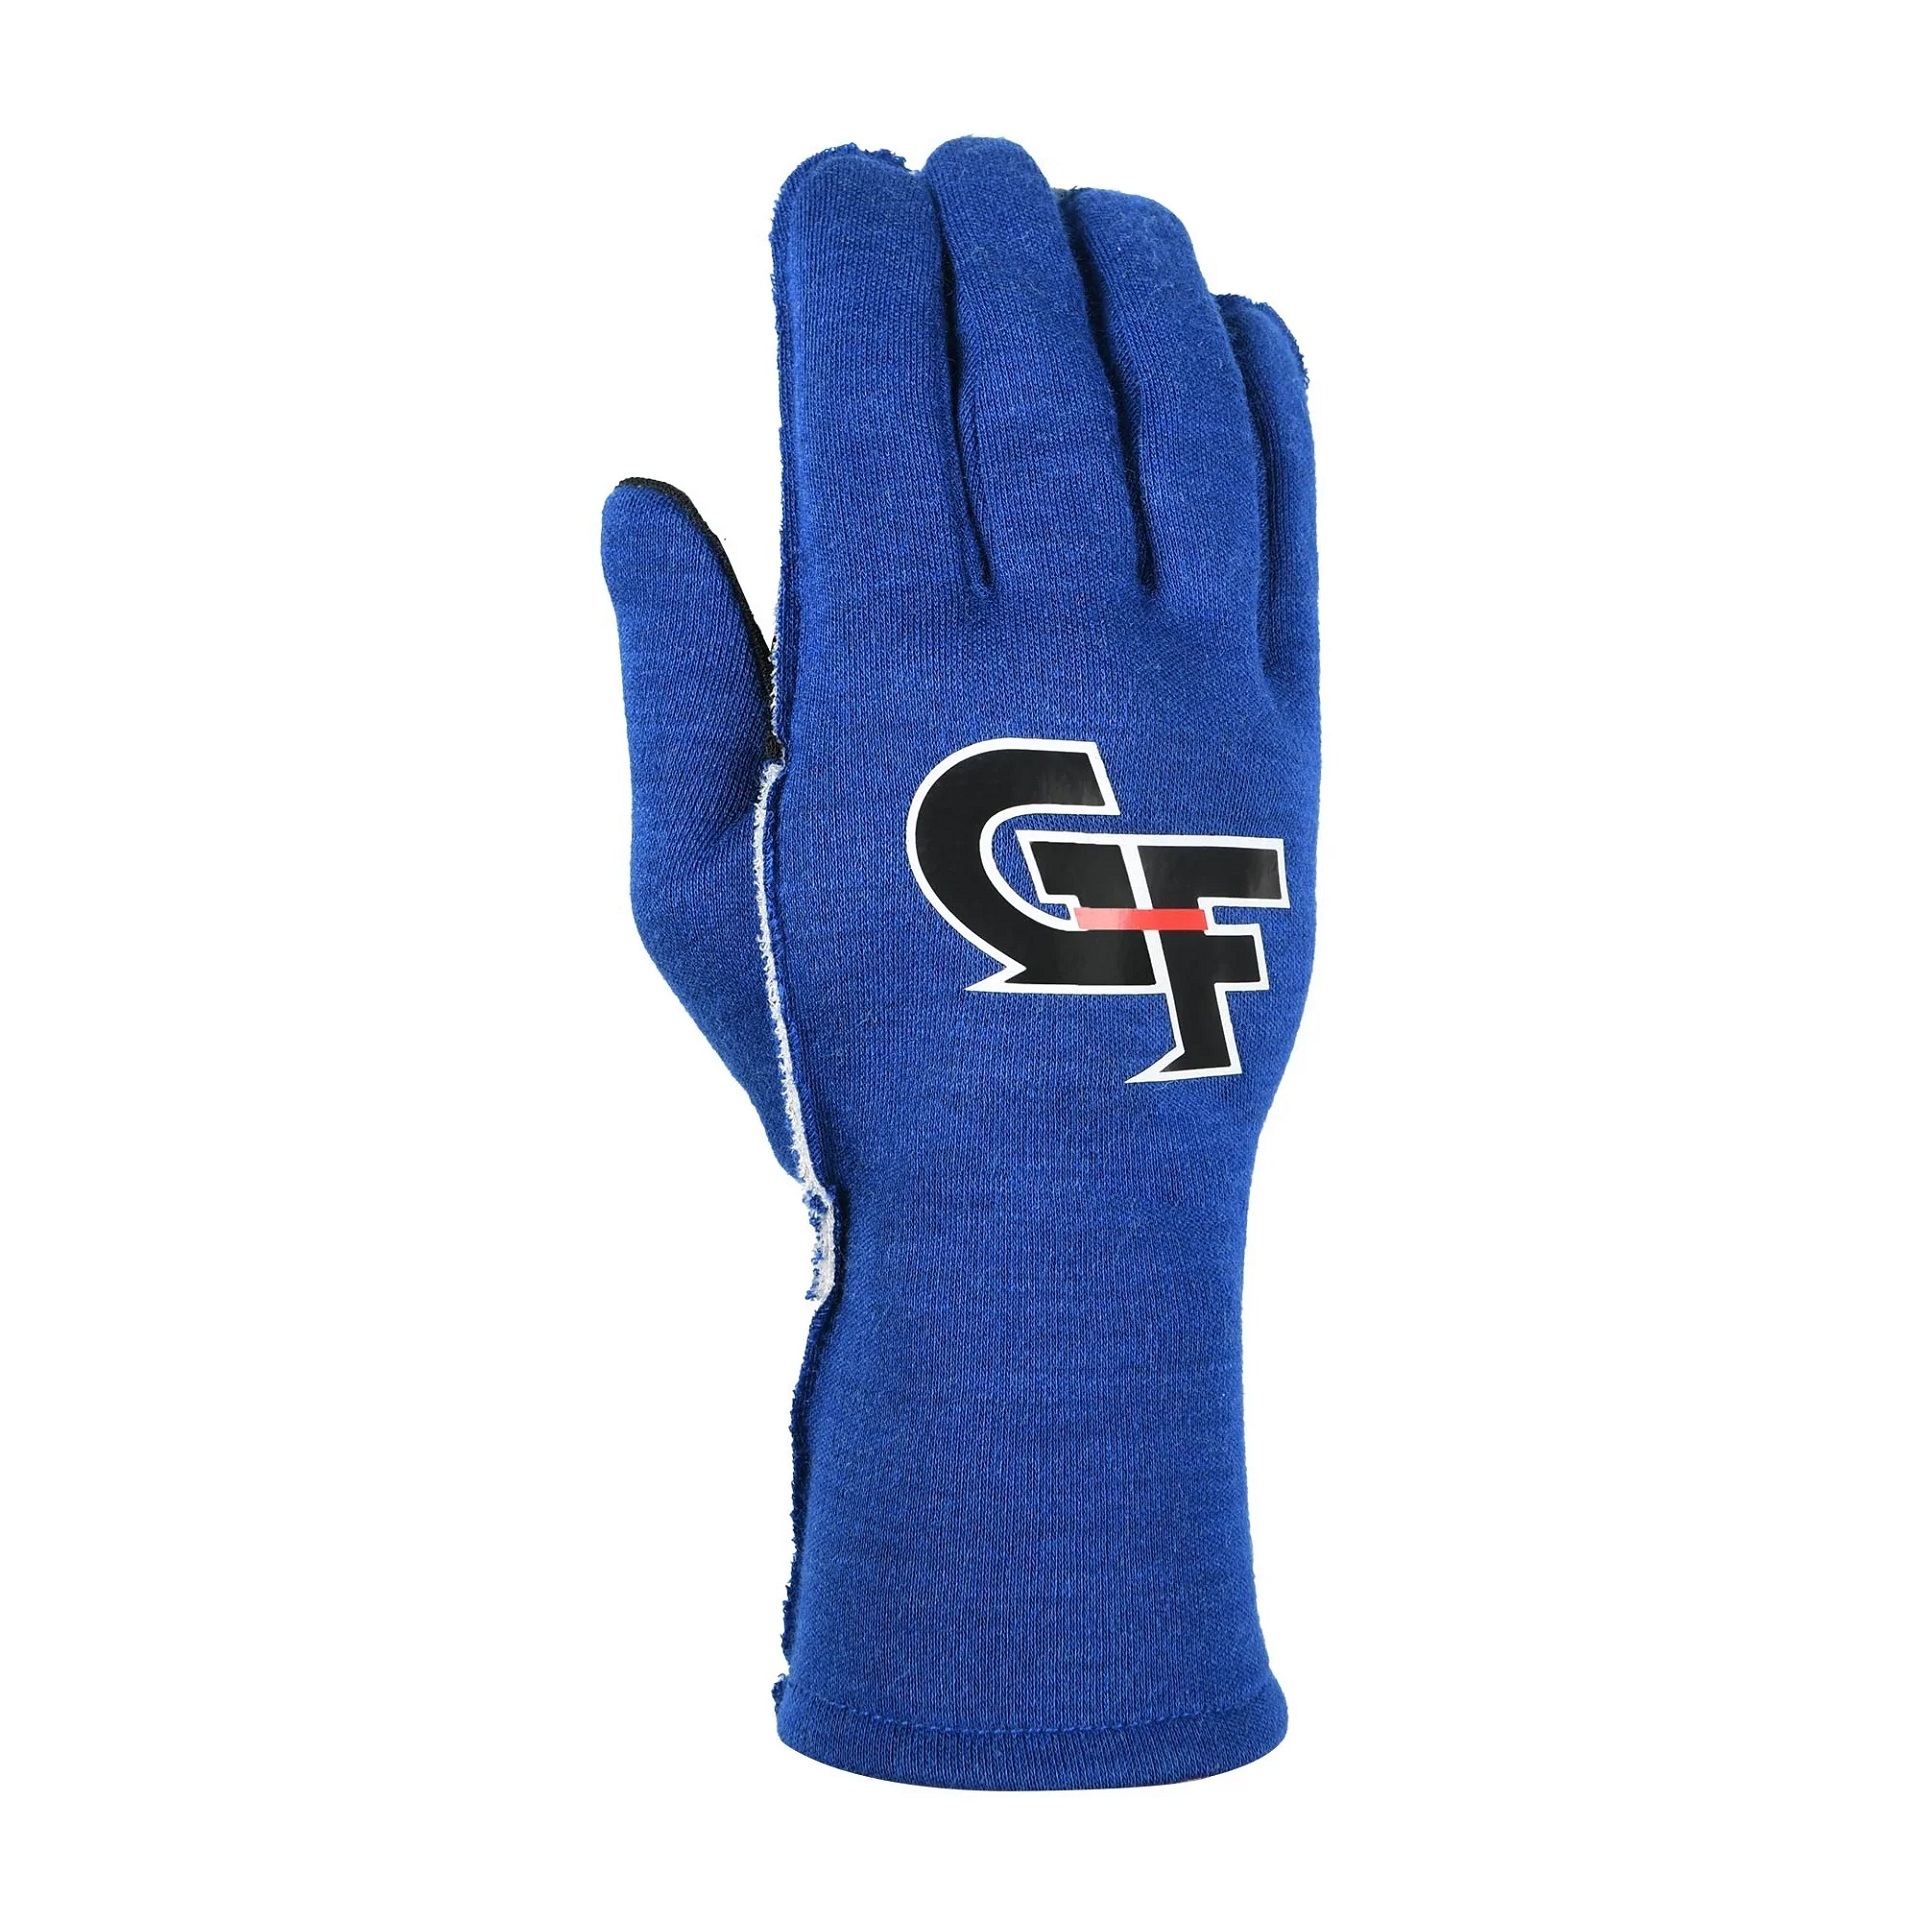 G-FORCE Gloves G-Limit Youth Small Black